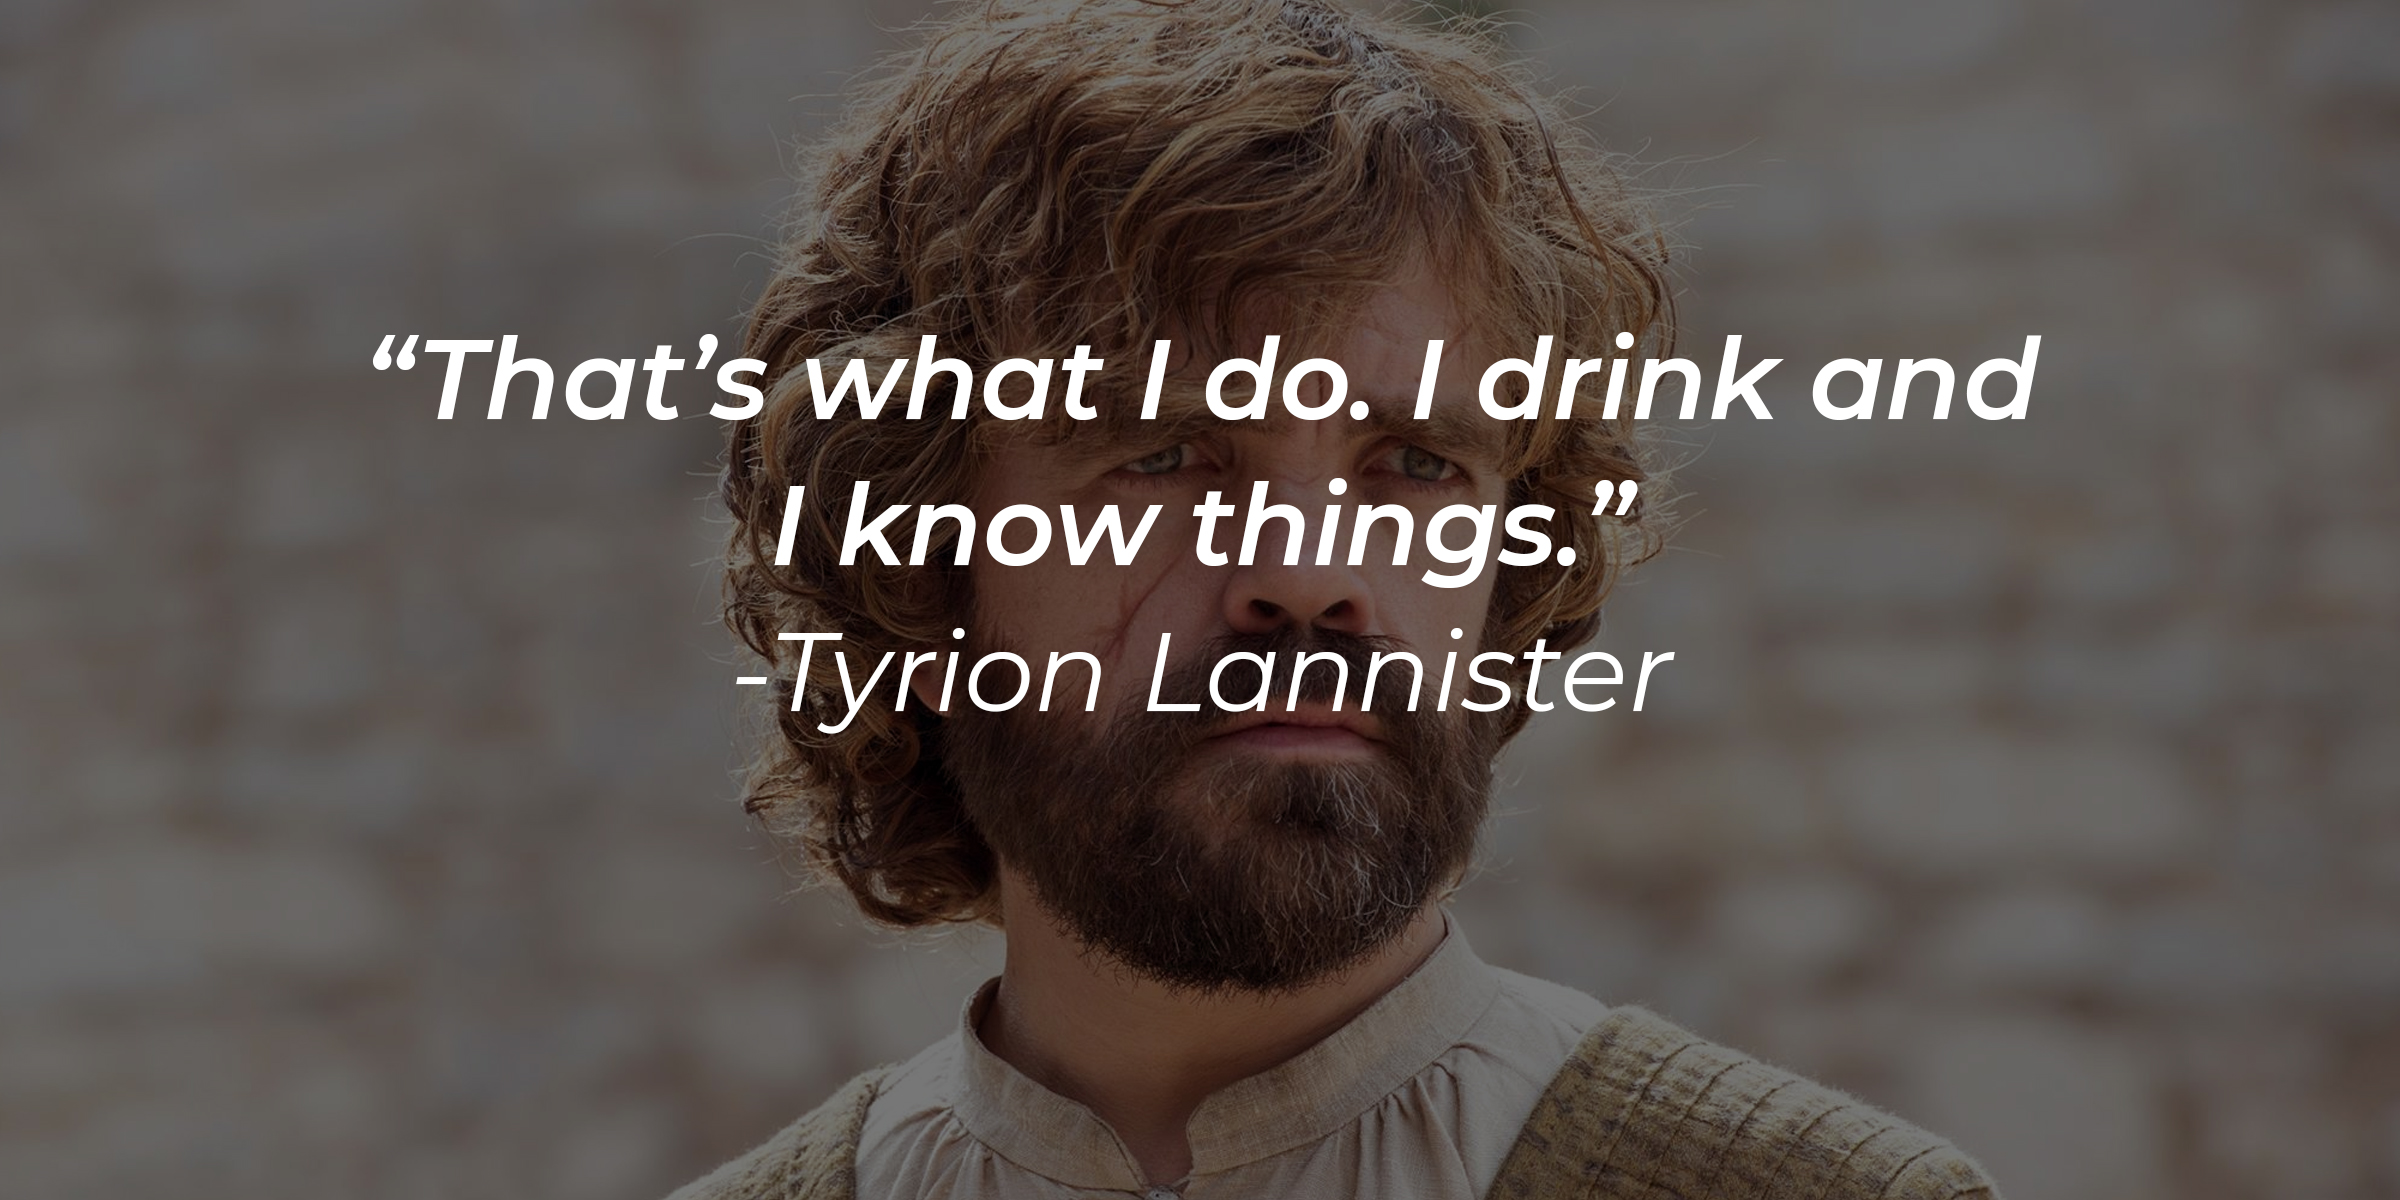 A photo of Tyrion Lannister with Tyrion Lannister's quote: “That’s what I do. I drink and I know things.” | Source: facebook.com/GameOfThrones